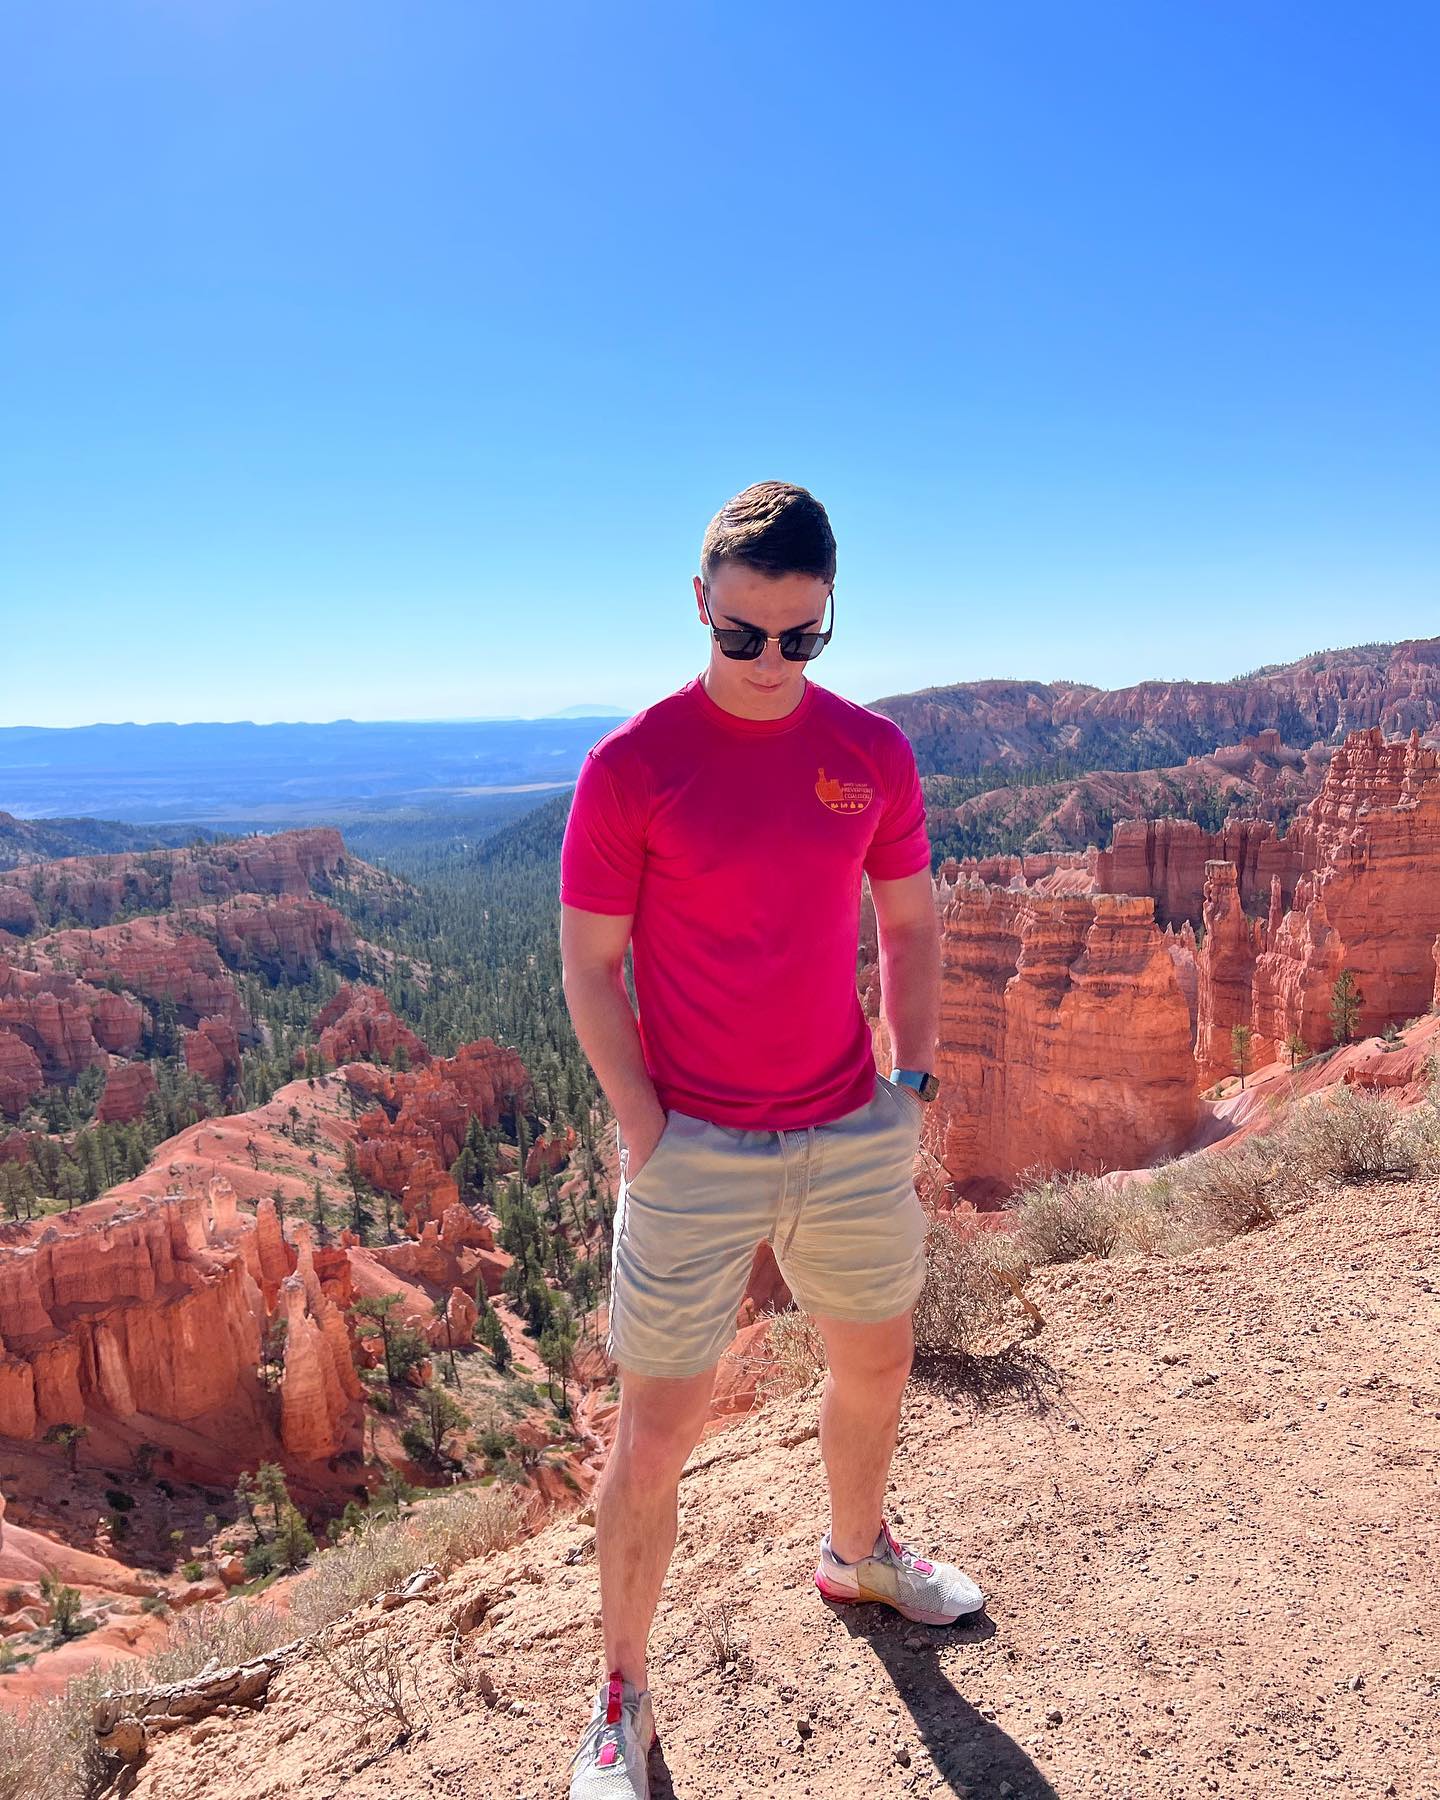 The gaggle of gays takes on Panguitch and had the best time! Such a fun summer adventure! 🫶🏻❤️

#friends #utah #panguitch #bryce #brycecanyon #gay #gays #gaymen #gaymuscle #gaypride #gayfriends #gaggle #gaggleofgays #gayfitness #gayman